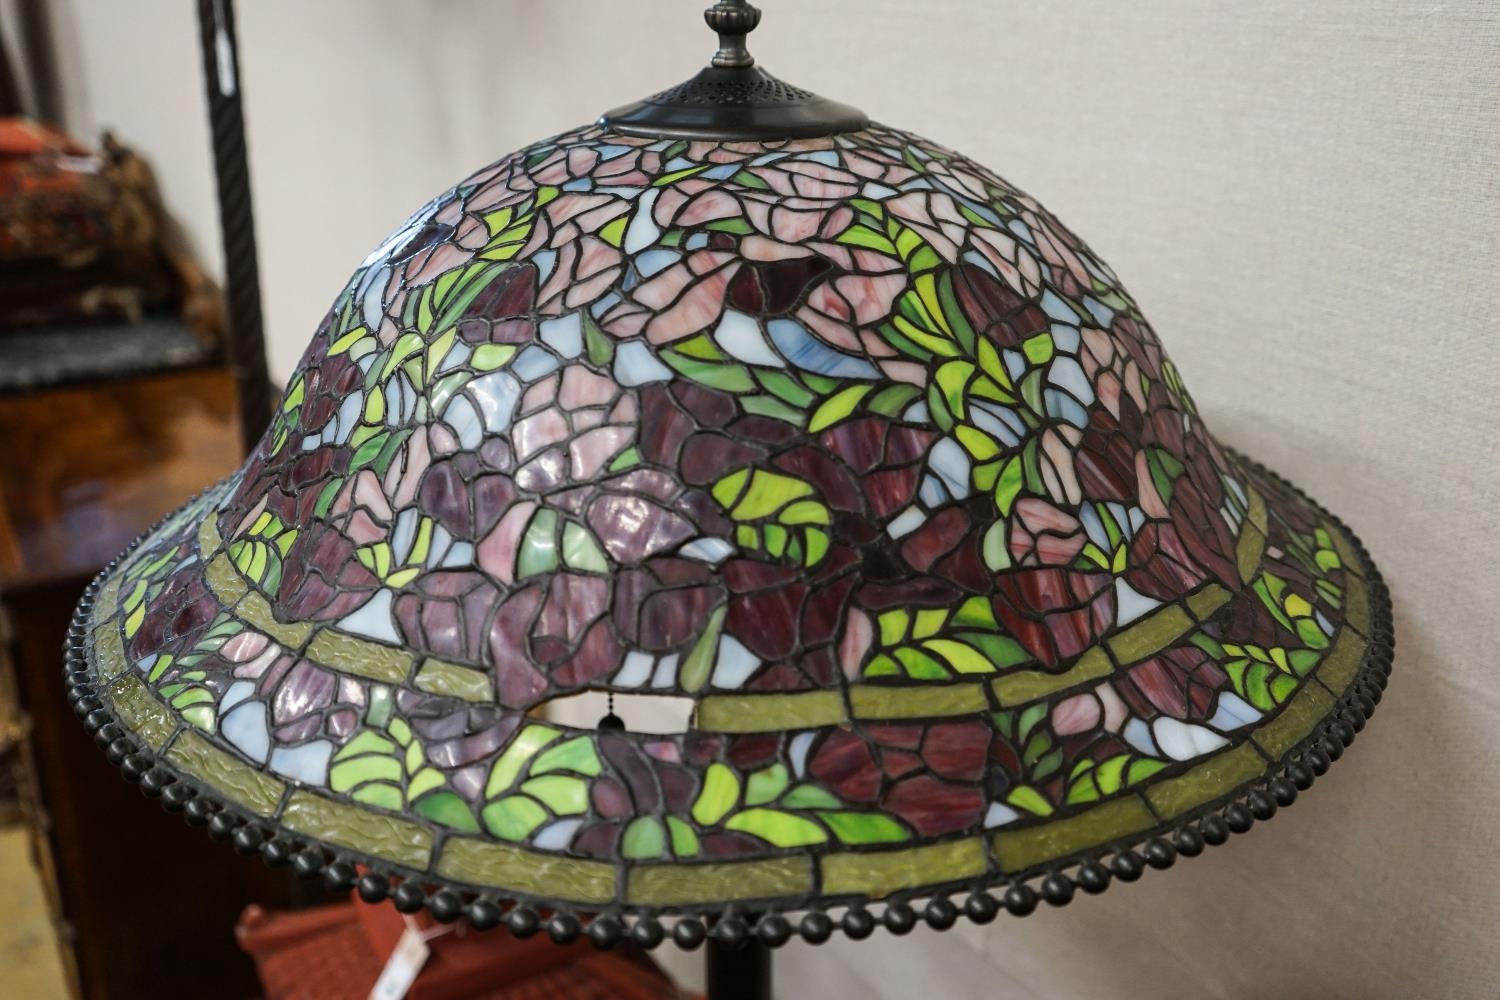 A bronzed finish Tiffany style standard lamp with shade, 160cm high, 59cm diameter - Image 4 of 6